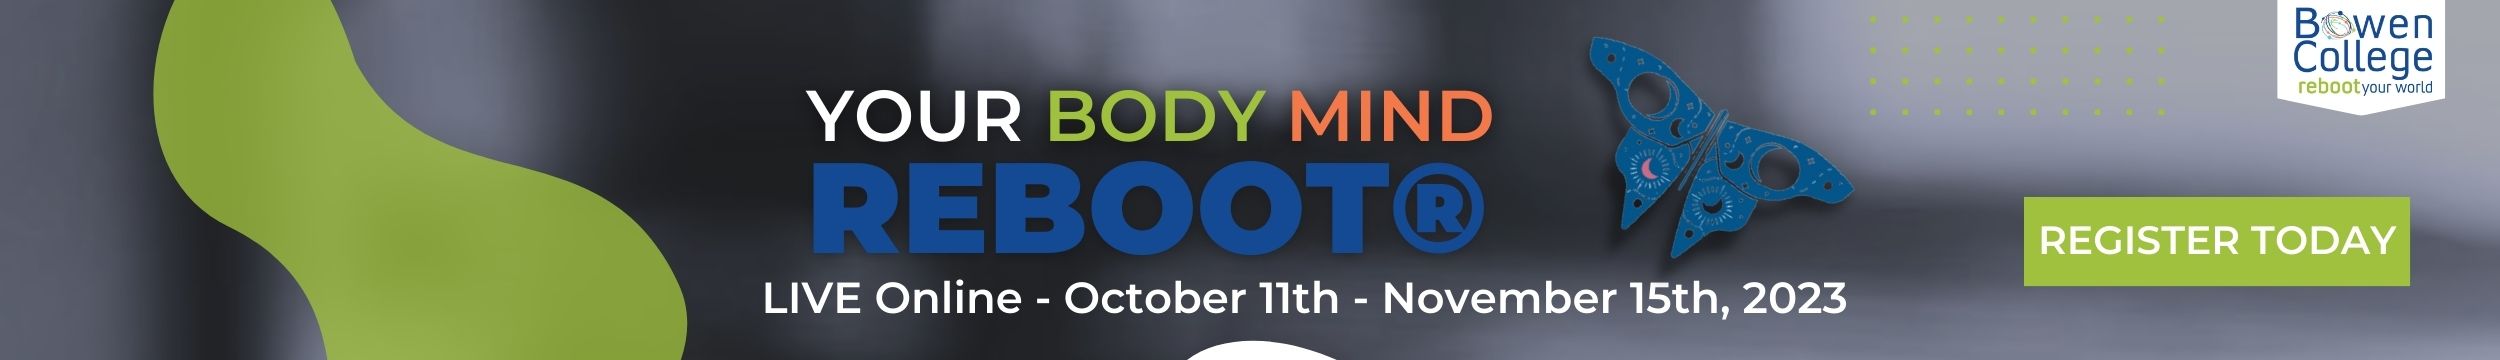 Your Body Mind Reboot